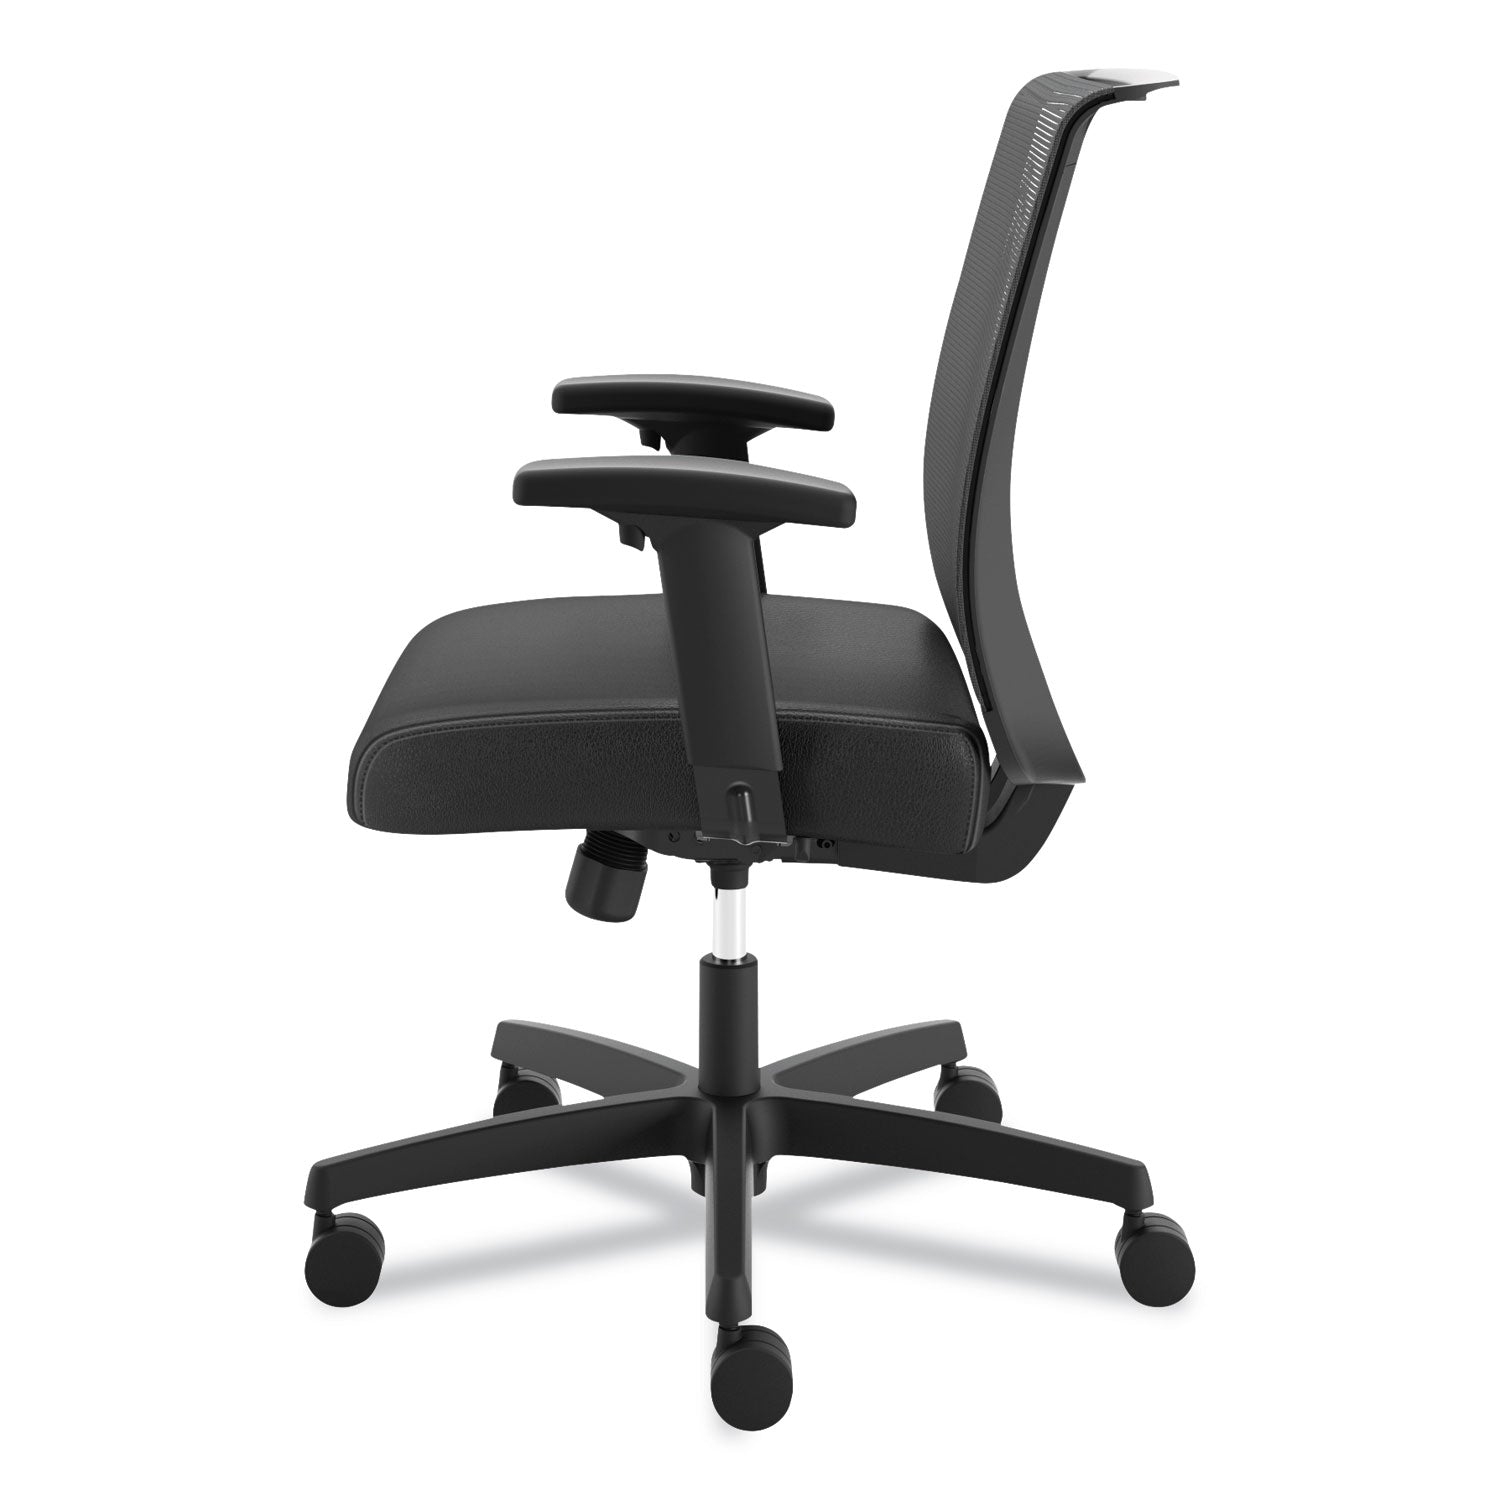 convergence-mid-back-task-chair-swivel-tilt-supports-up-to-275-lb-1575-to-2013-seat-height-black_honcms1aur10 - 4